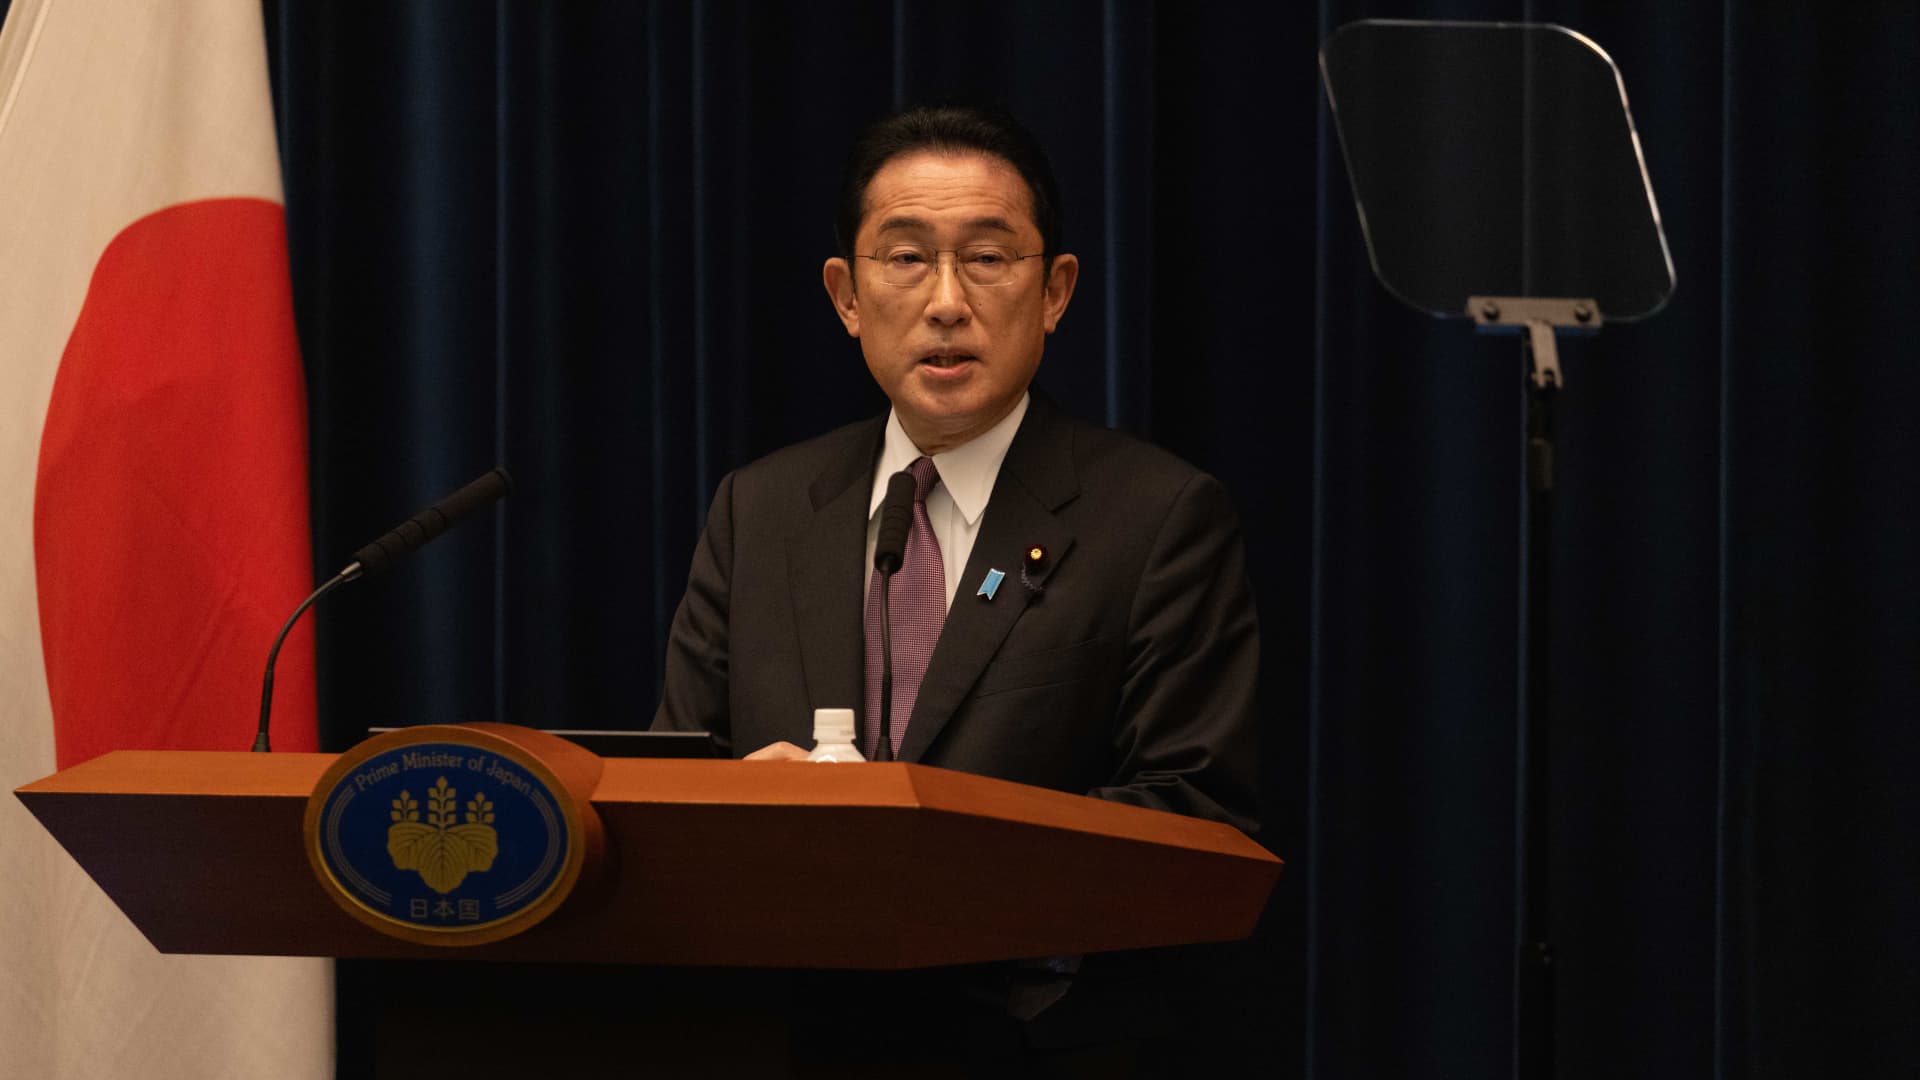 Japanese Prime Minister, Fumio Kishida, speaks during a press conference on March 16, 2022 in Tokyo, Japan.